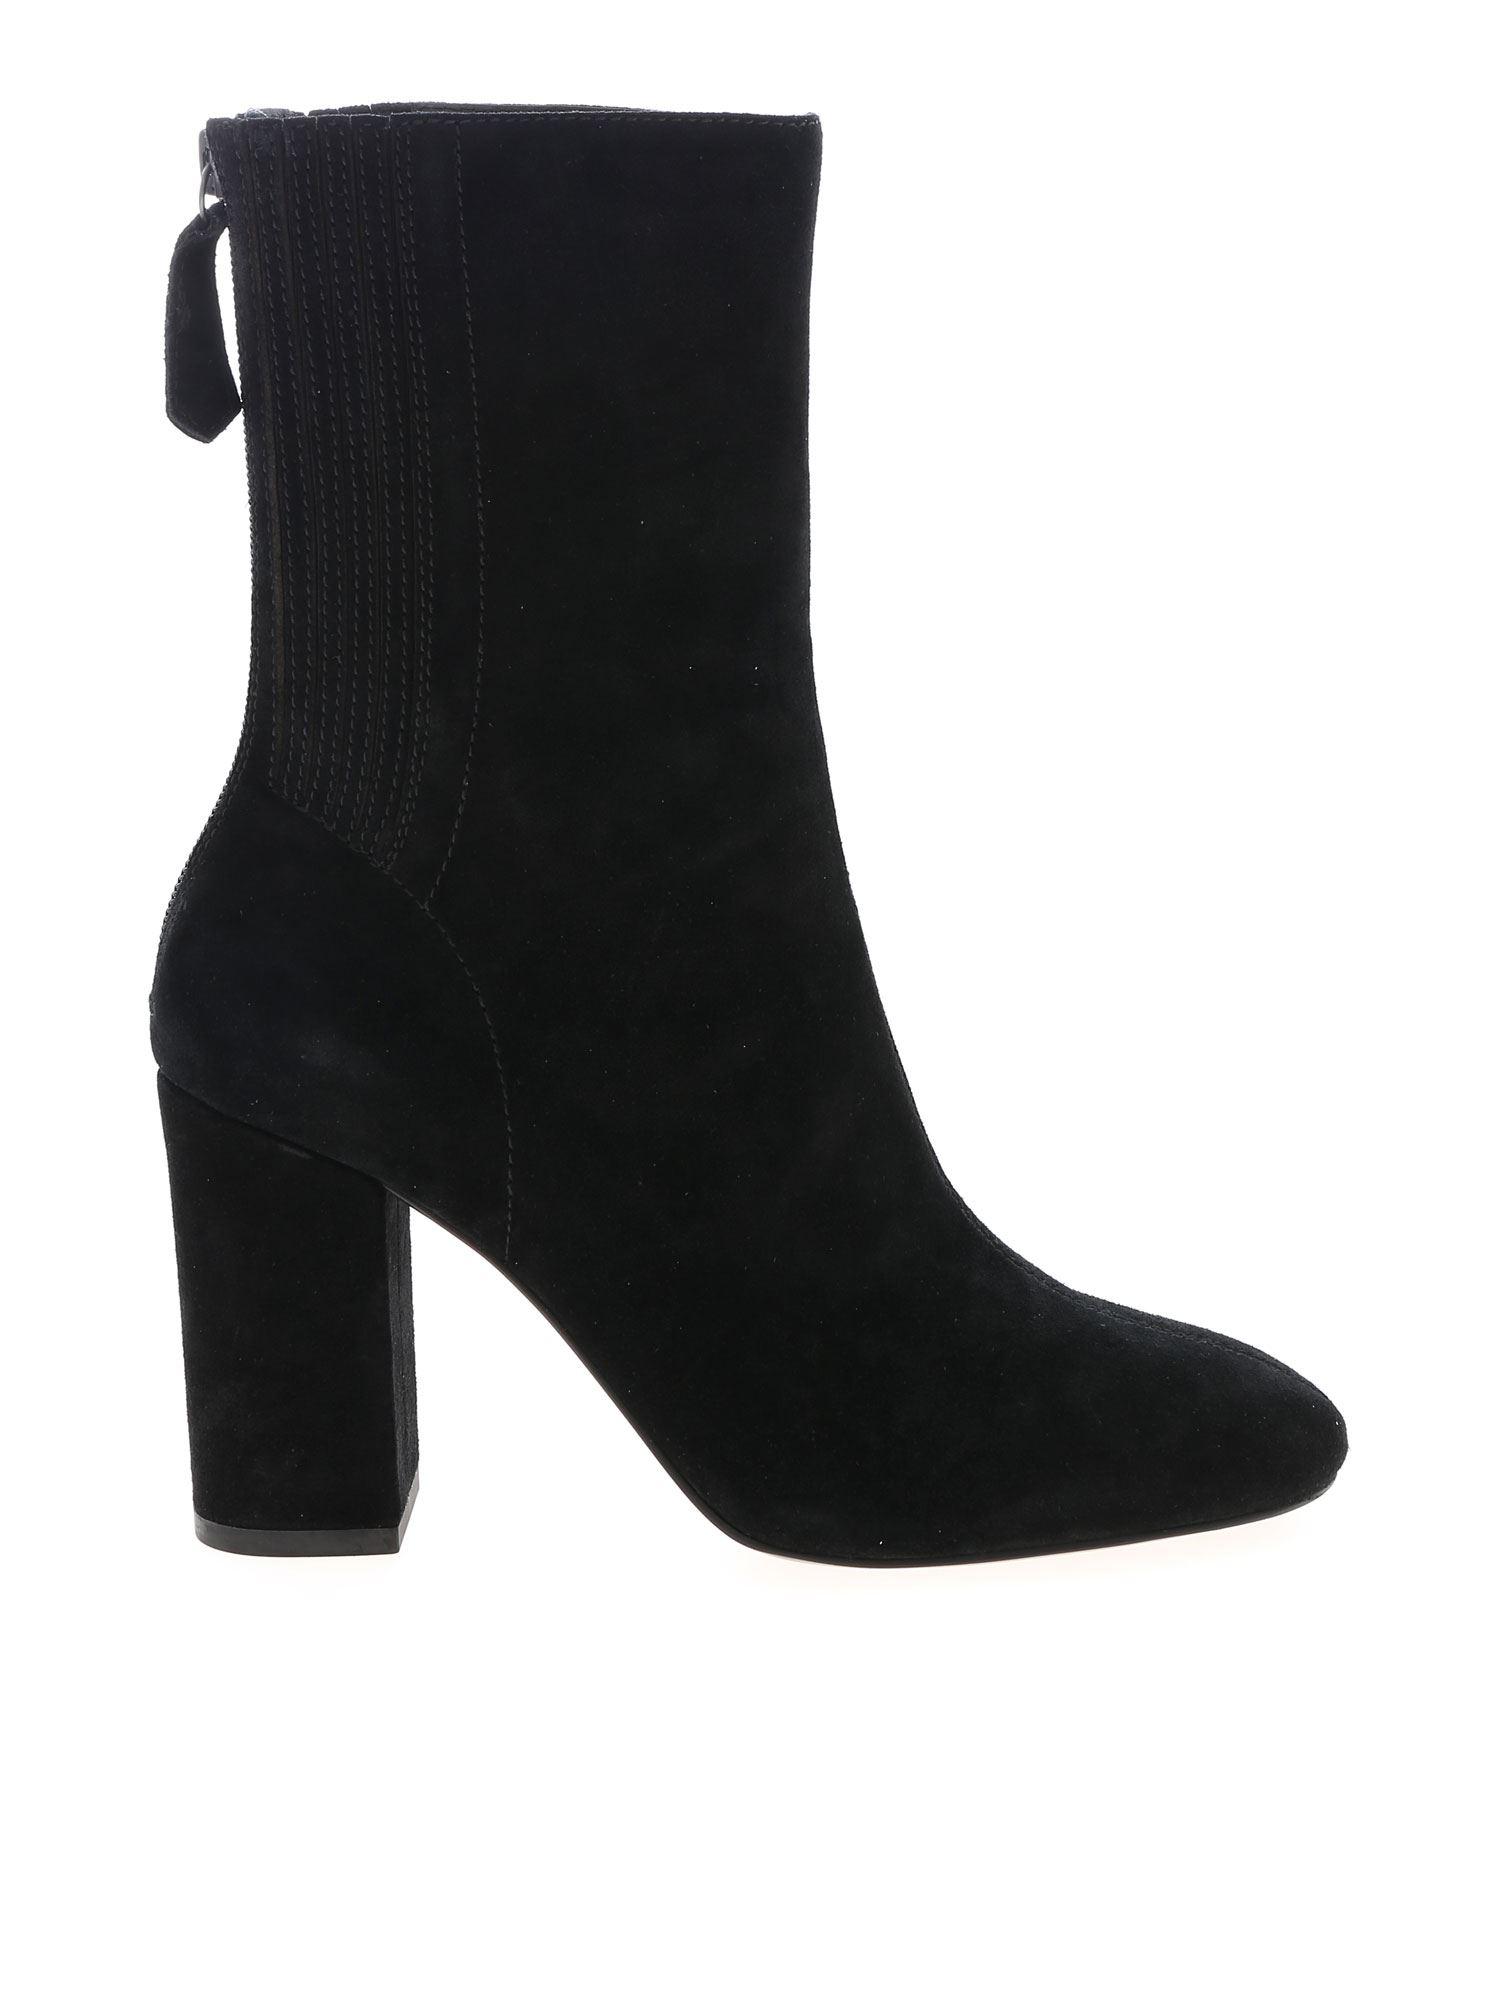 Ash Jasmine Ankle Boots In Black Suede - Lyst